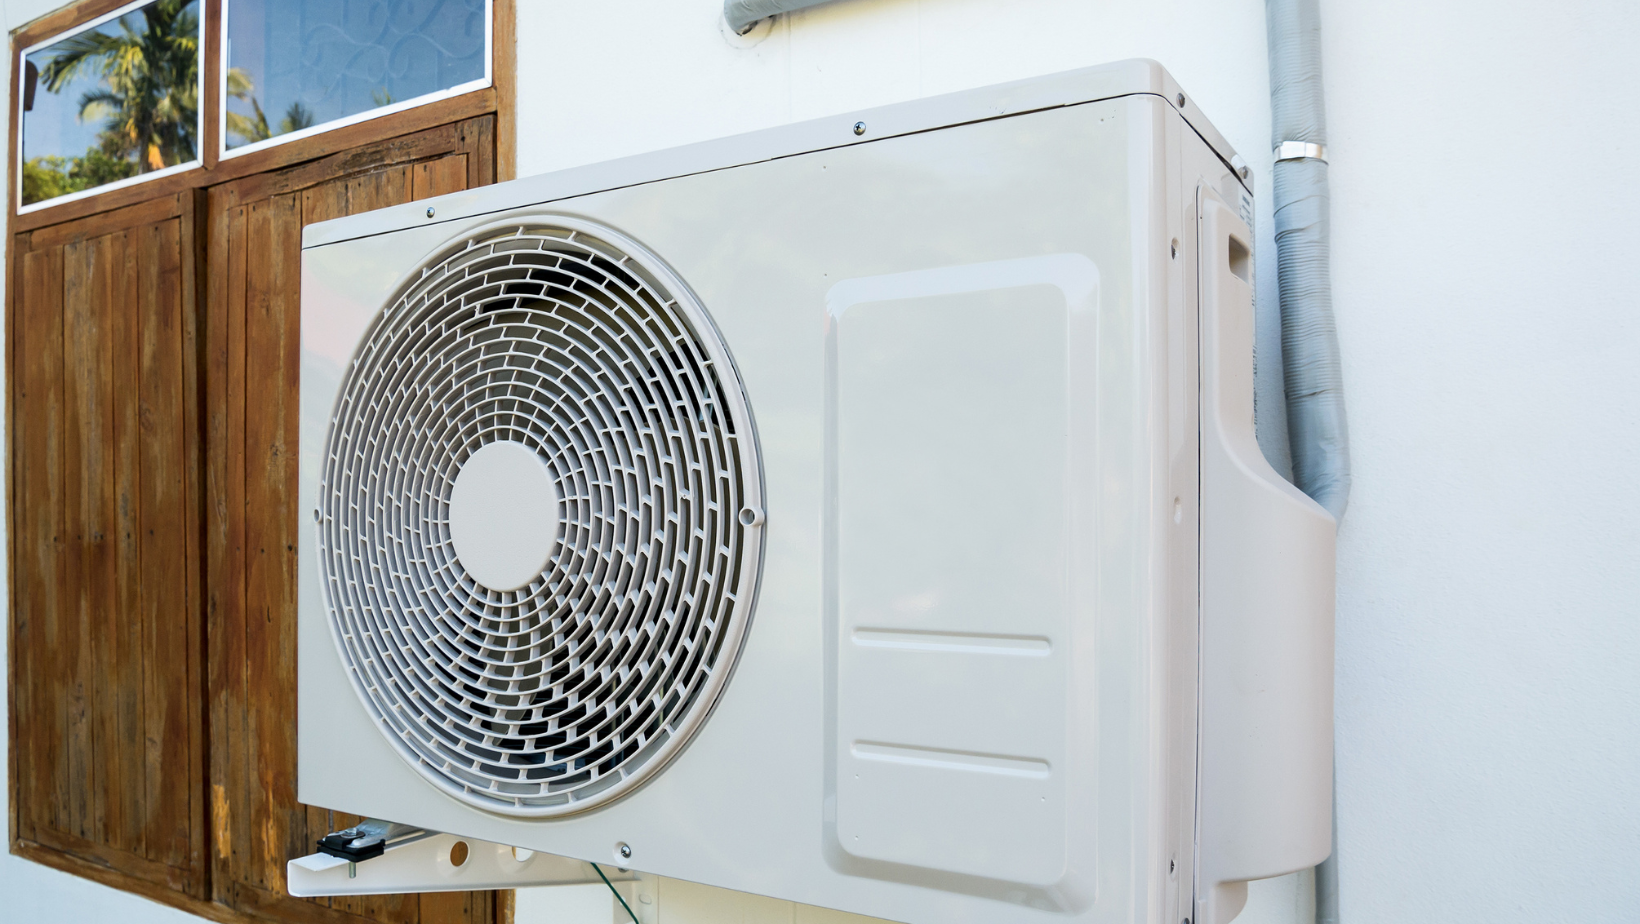 Types of commercial hvac system contractors’ systems for commercial buildings